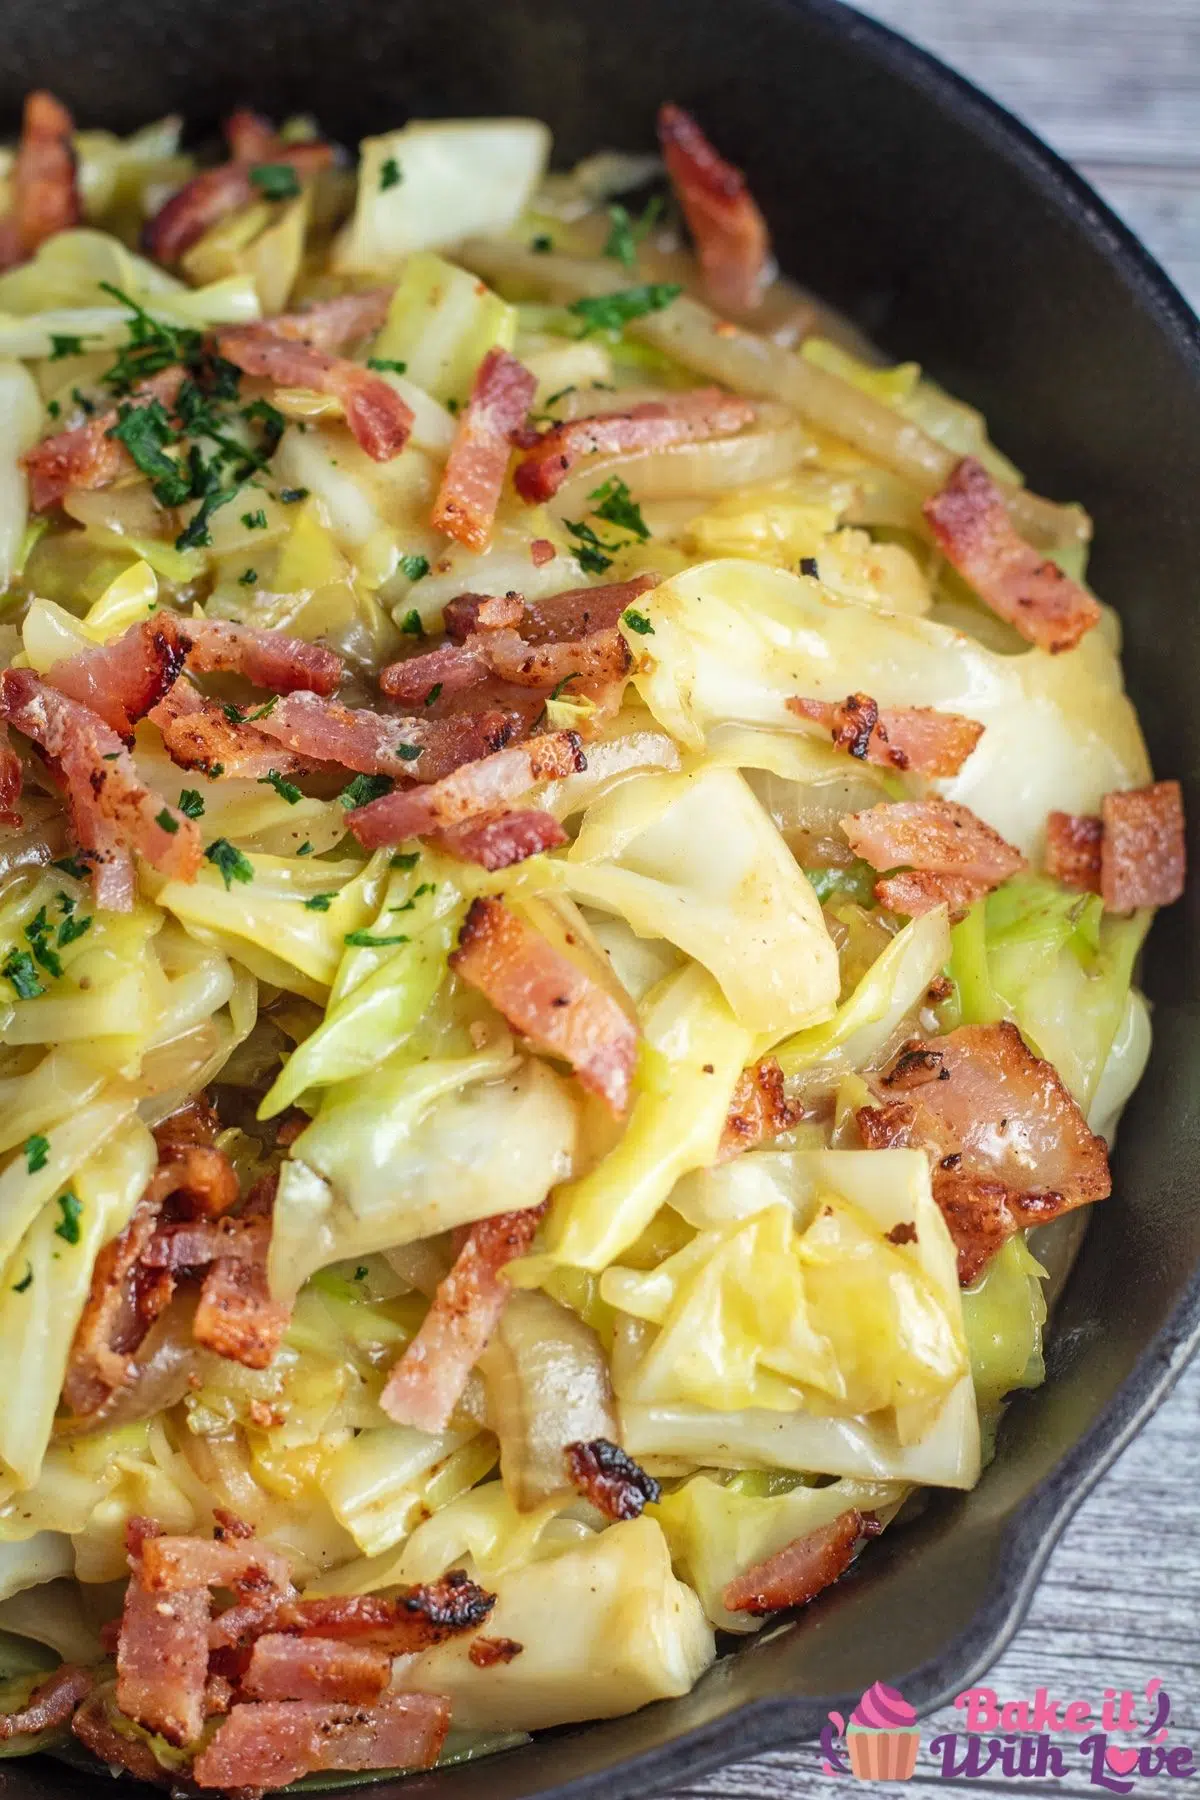 Tall Image of a cast iron pan with Southern fried cabbage with bacon.